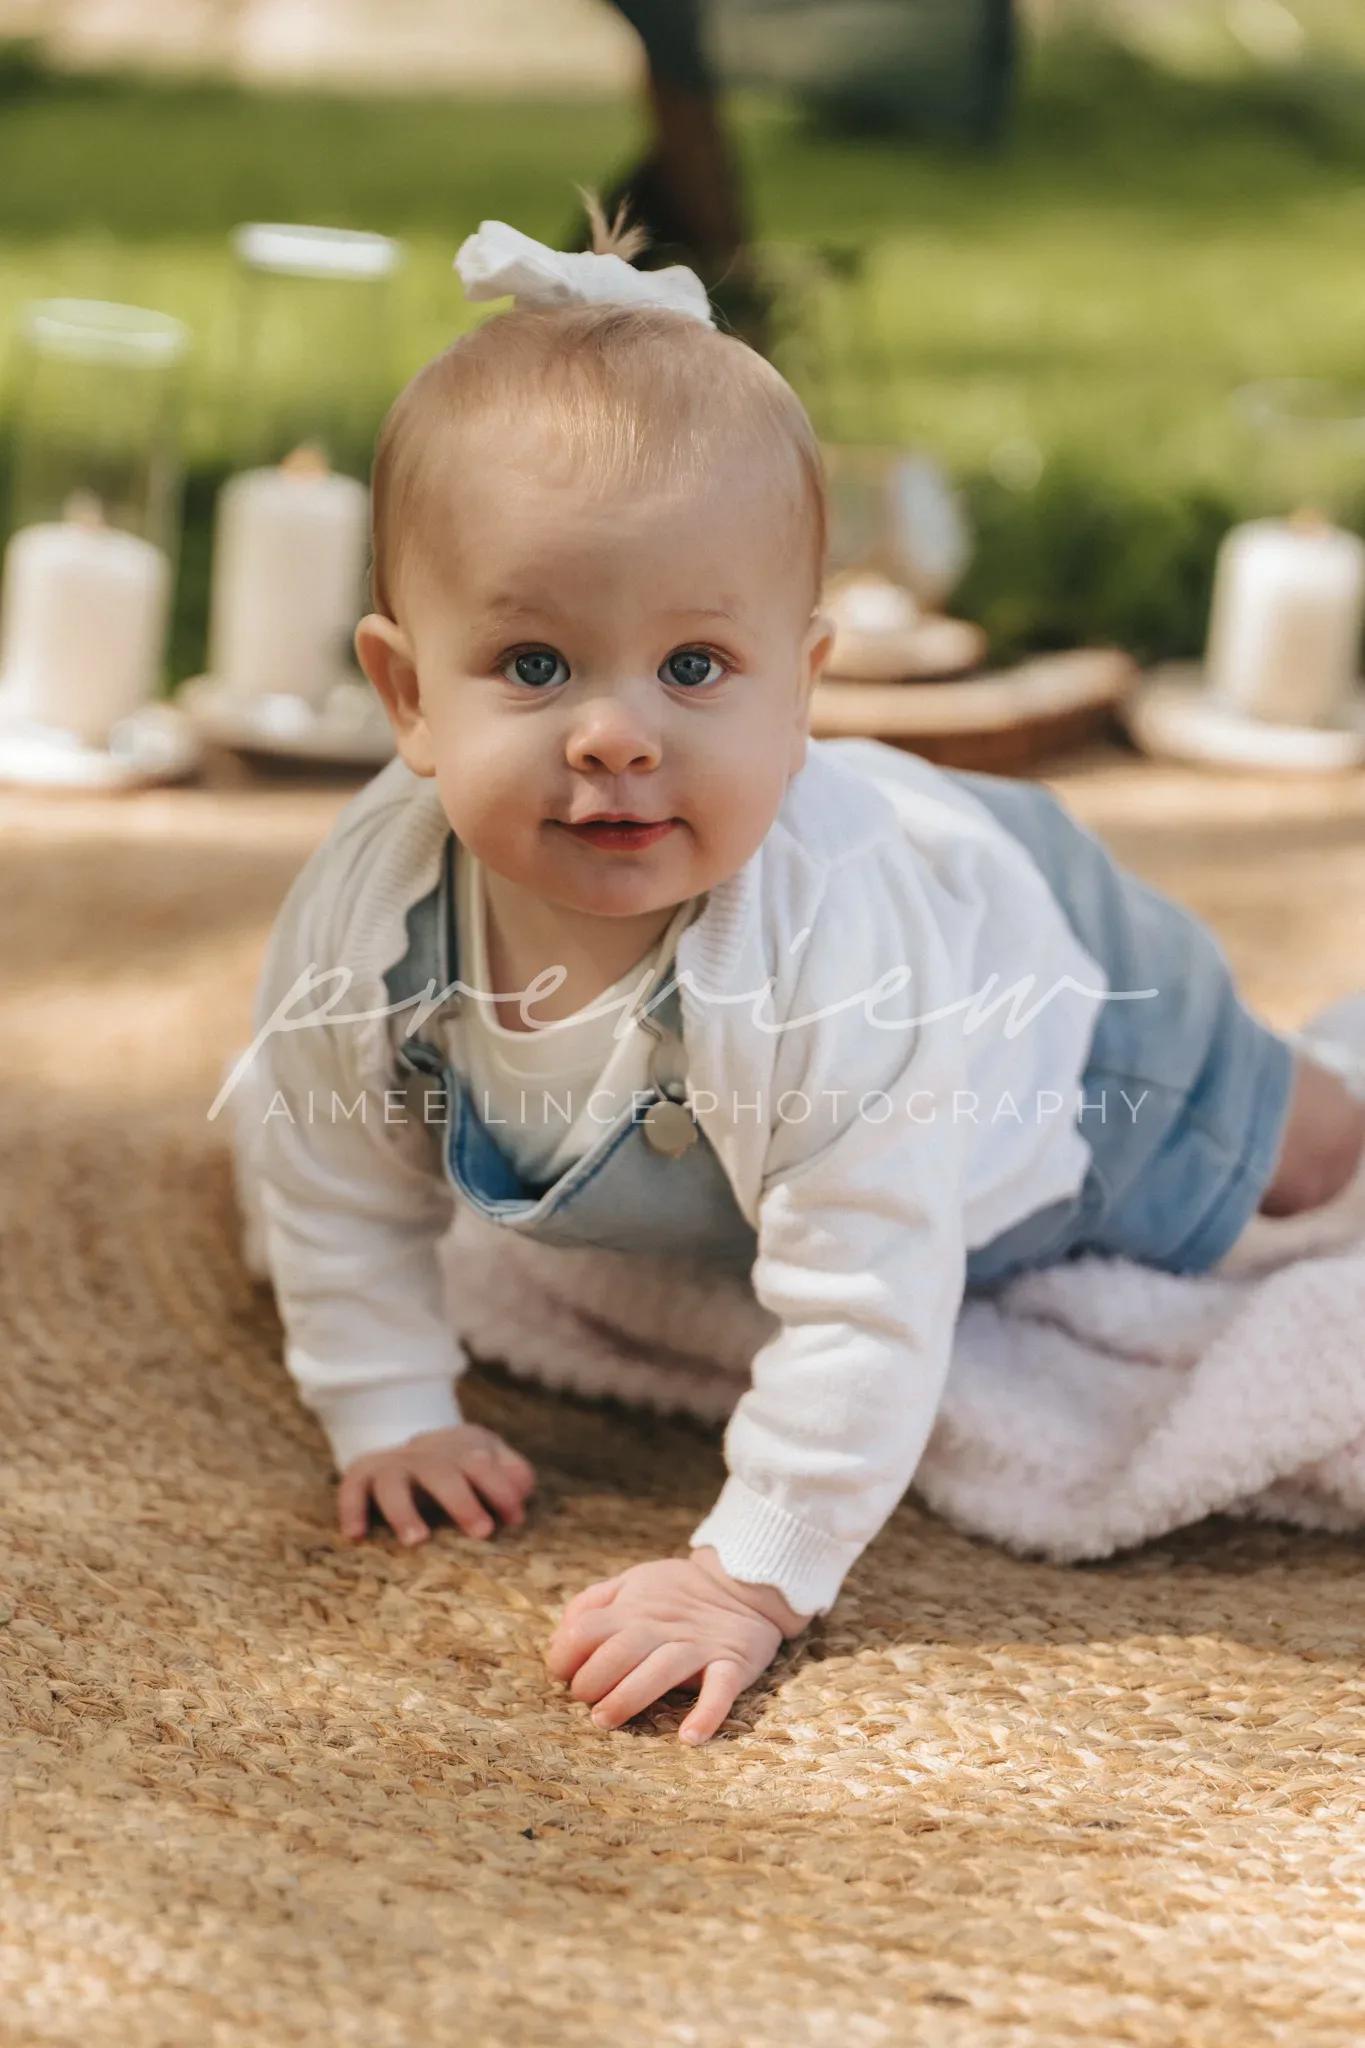 A baby with blue eyes and a white bow headband lies on a blanket, looking up with a joyful expression. they wear a denim shirt over a white top. soft sunlight filters through trees, creating a warm backdrop.